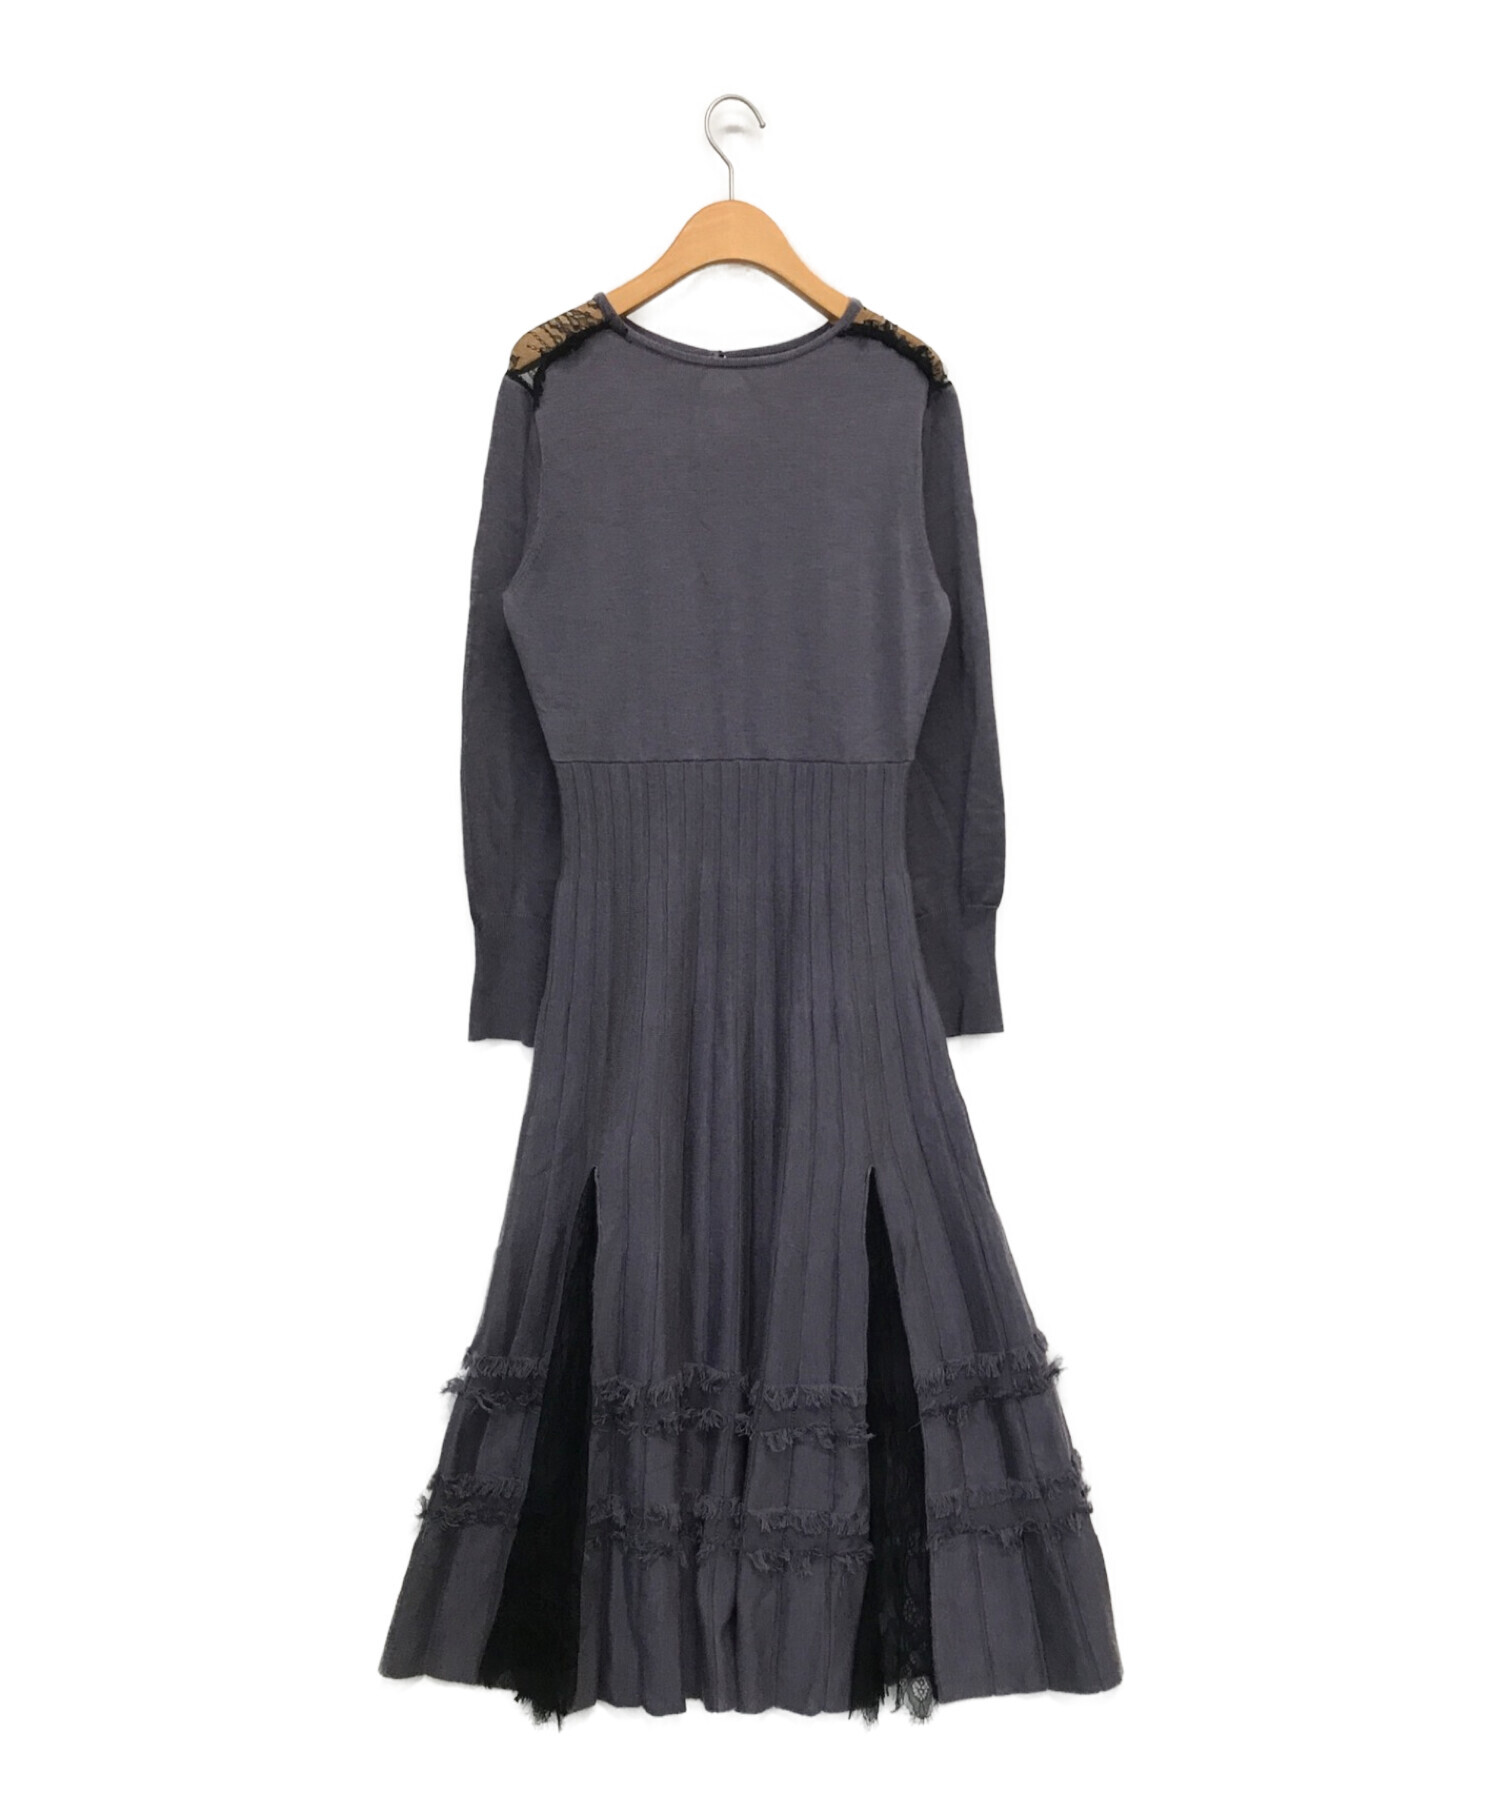 Her lip to (ハーリップトゥ) Lace Trimmed Knit Long Dress ラベンダー サイズ:M